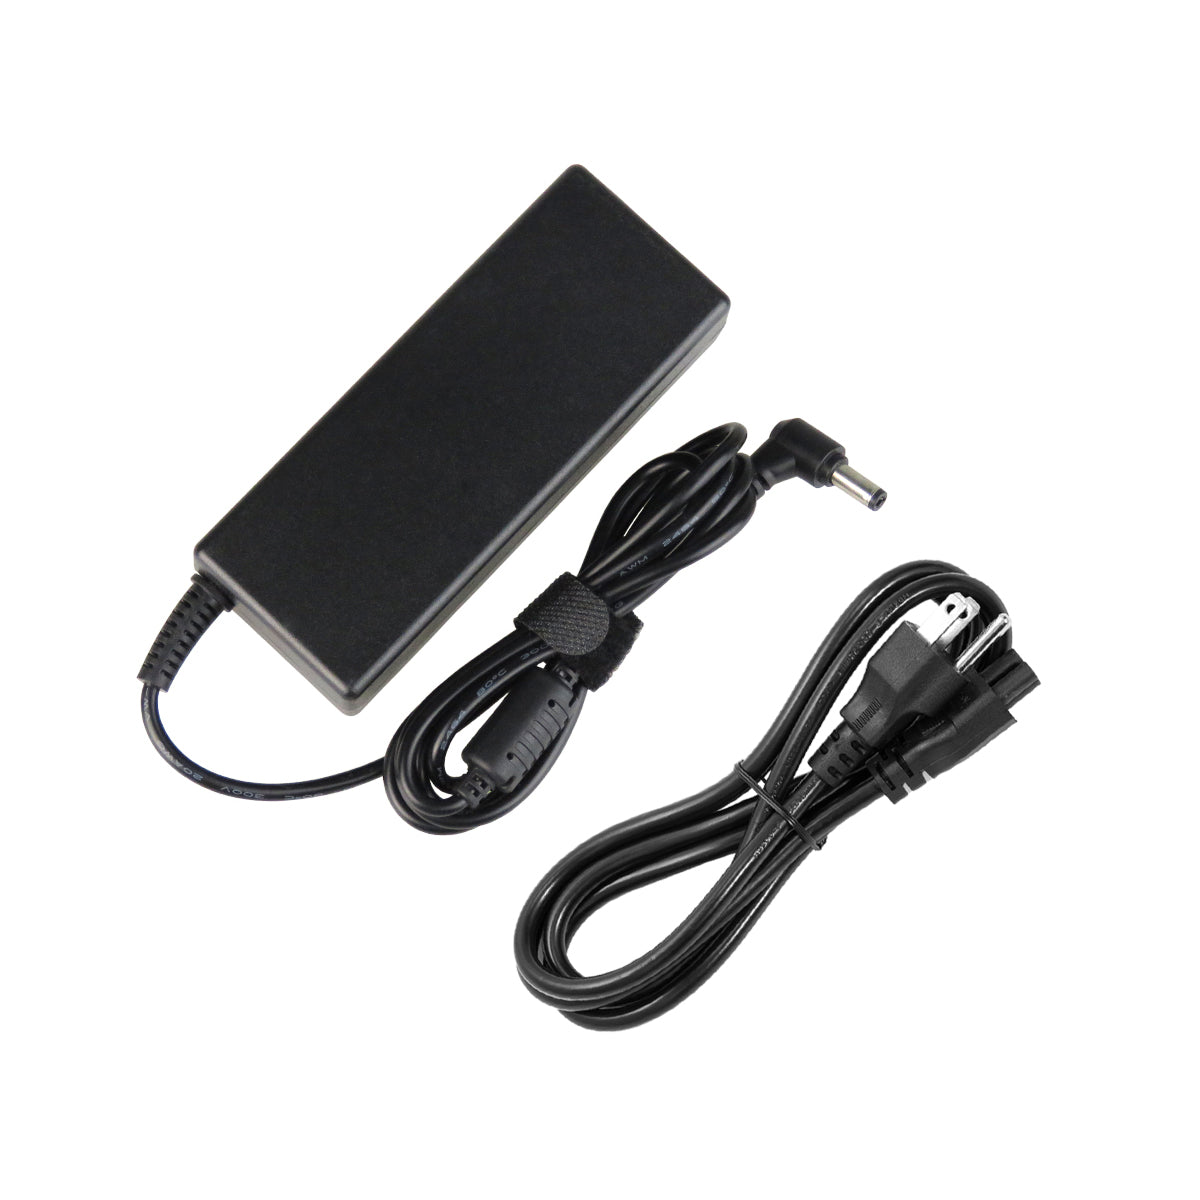 AC Adapter Charger for ASUS X55 Notebook.